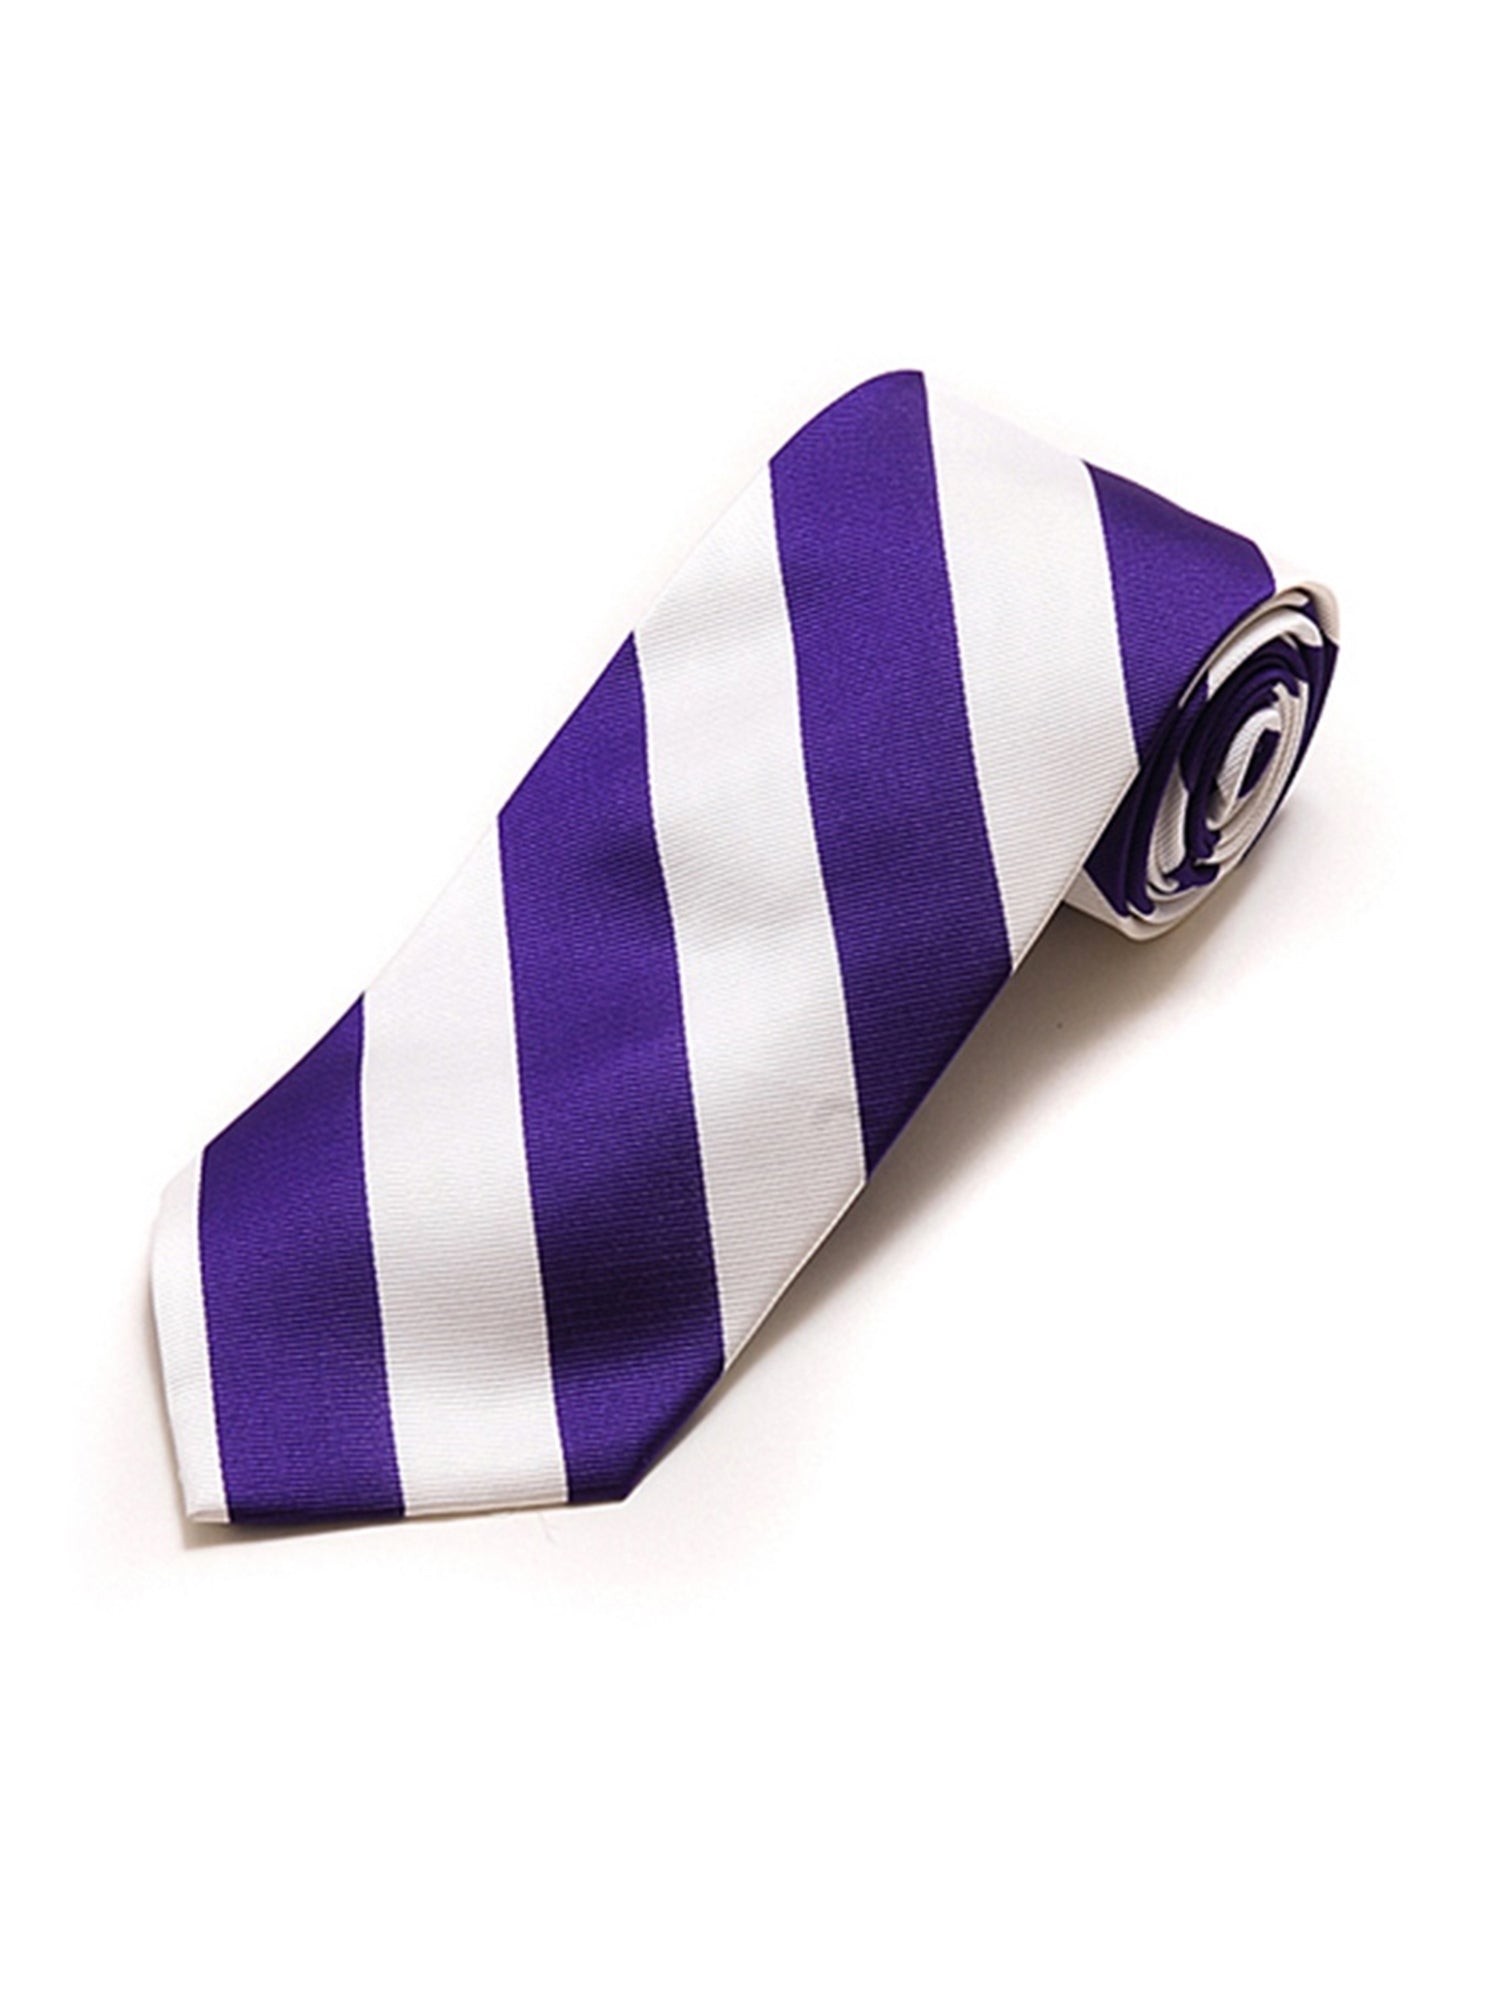 Men's College Striped Colored Silk Long Or X-Long Neck Tie Neck Tie TheDapperTie Purple & White 63" long & 3.75" wide 